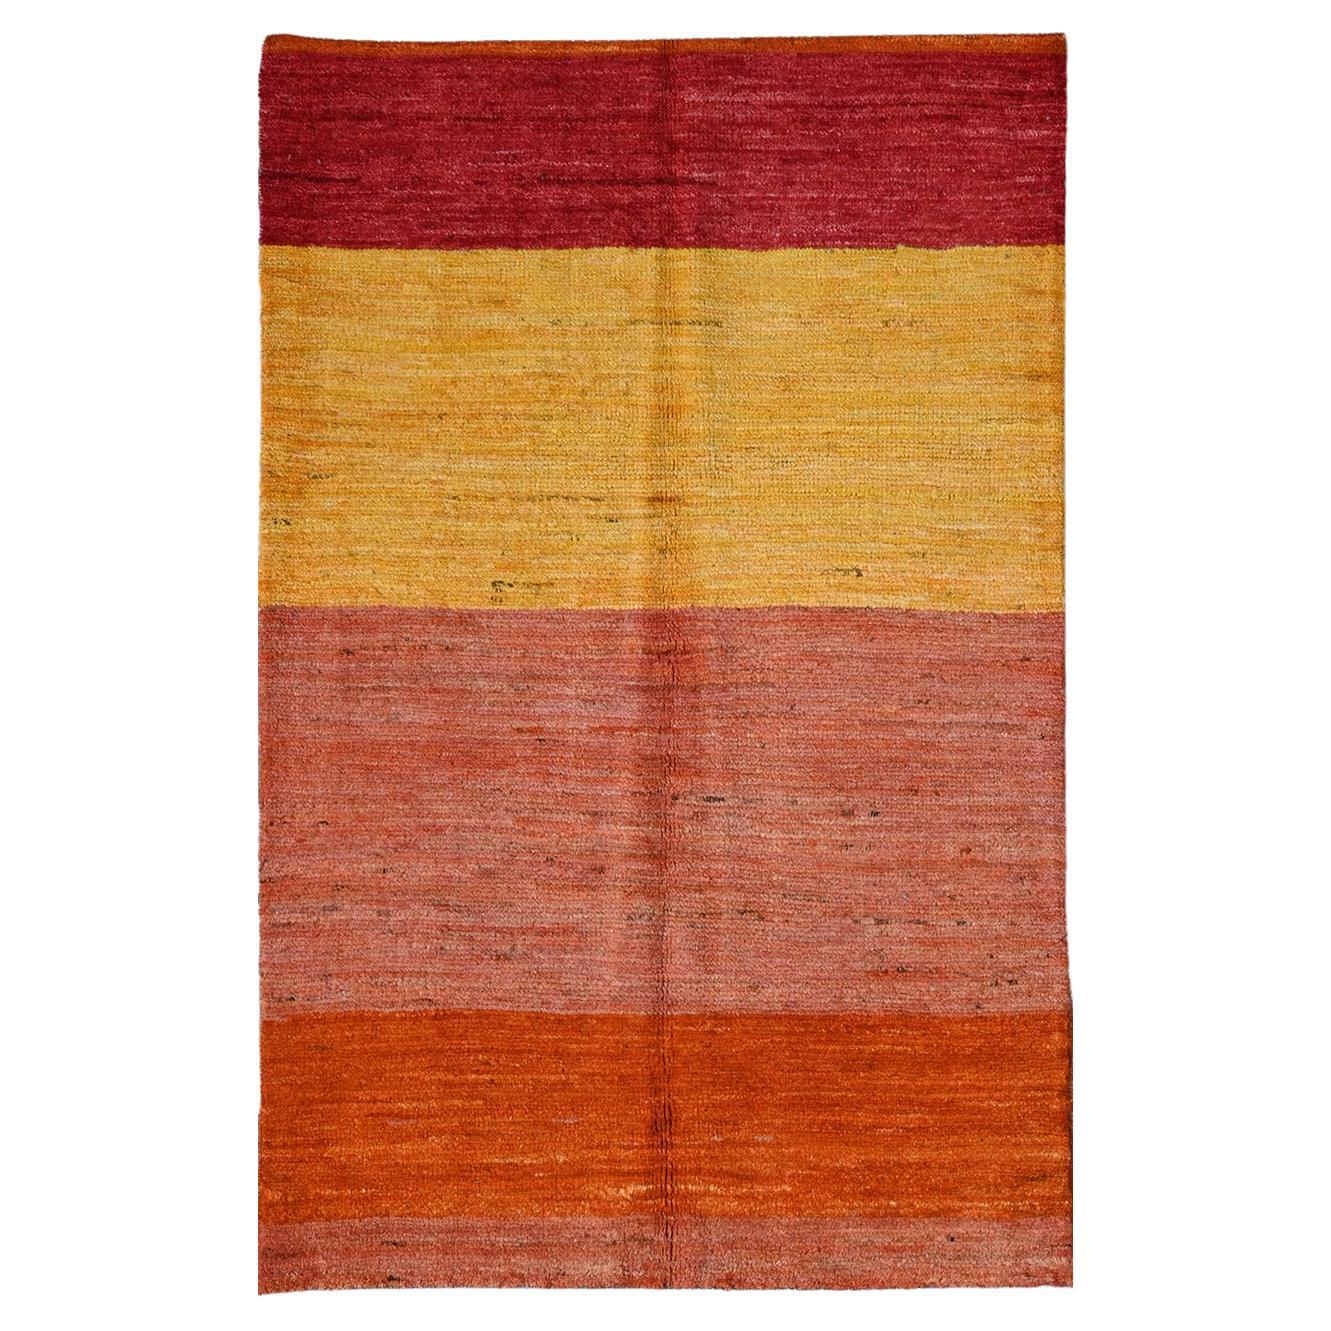 Taimany Afghan rug with color variation from red to orange For Sale